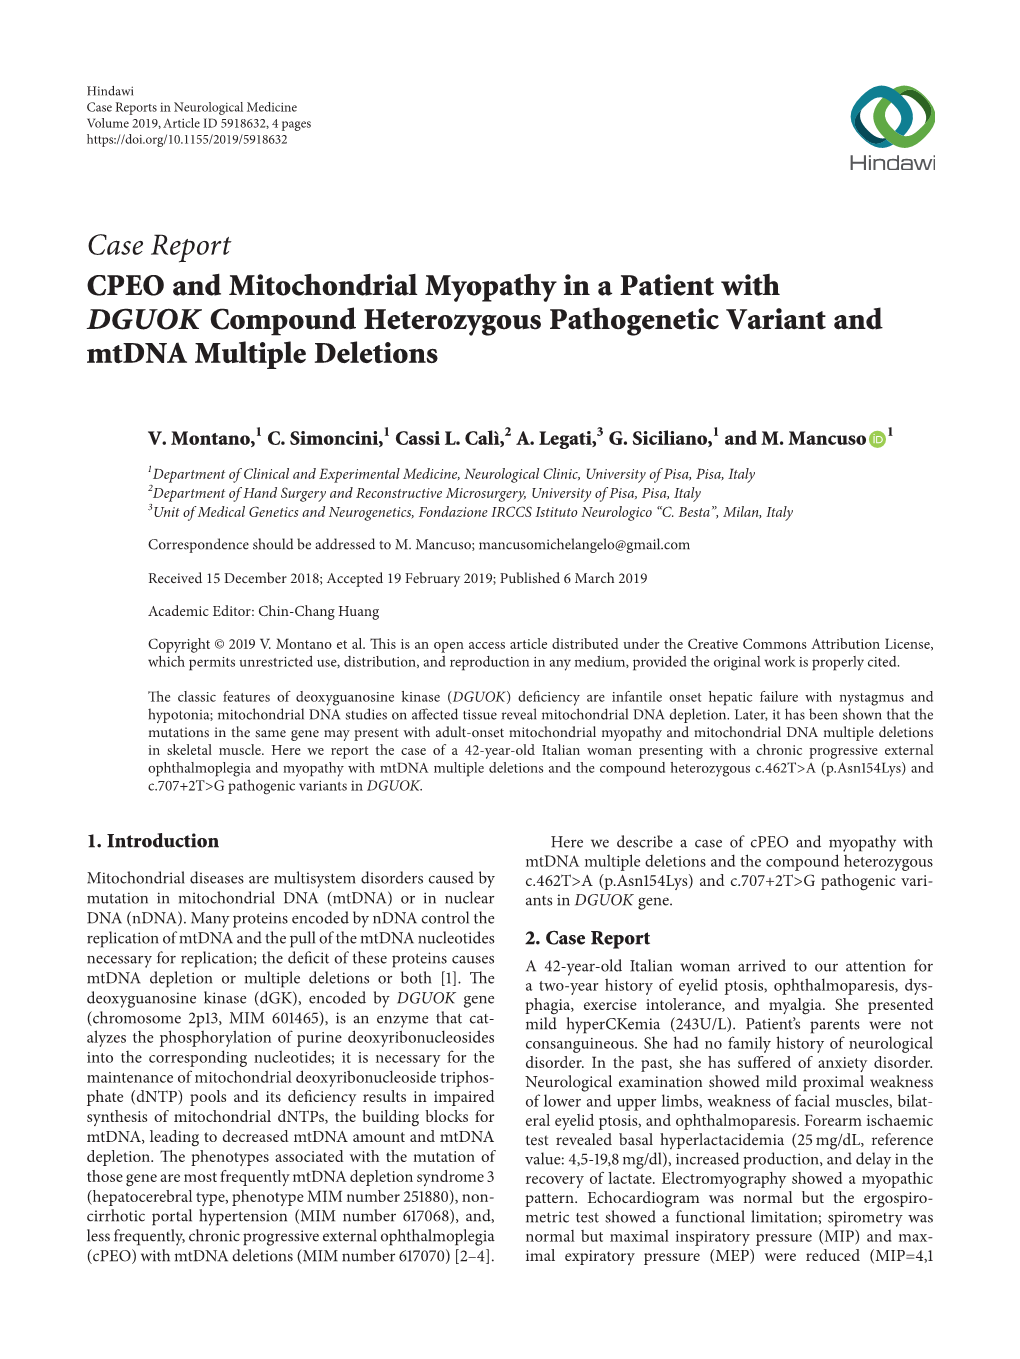 CPEO and Mitochondrial Myopathy in a Patient with DGUOK Compound Heterozygous Pathogenetic Variant and Mtdna Multiple Deletions